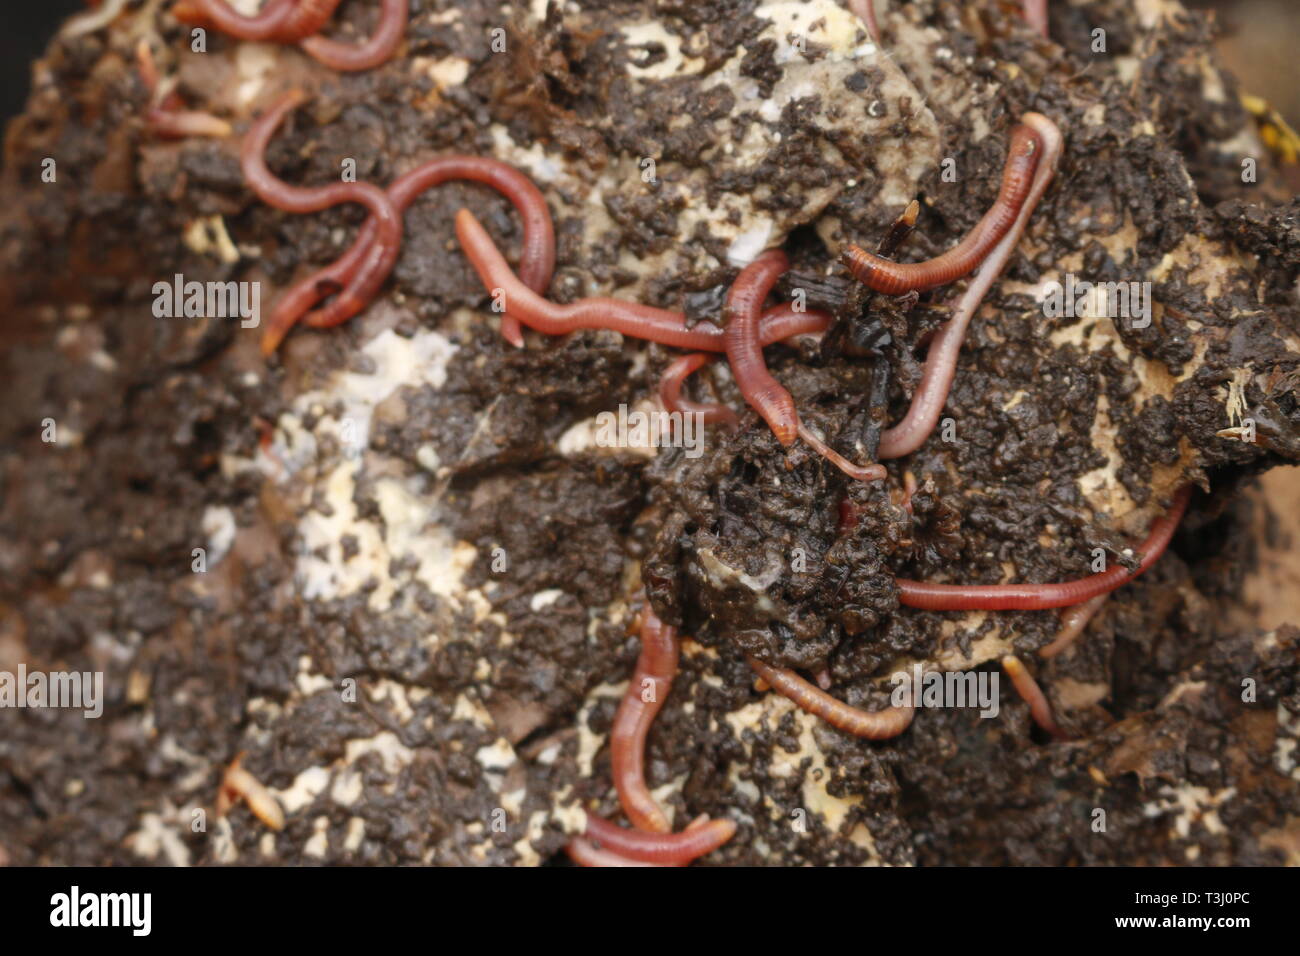 Red worms in compost or manure. Live bait for fishing Stock Photo